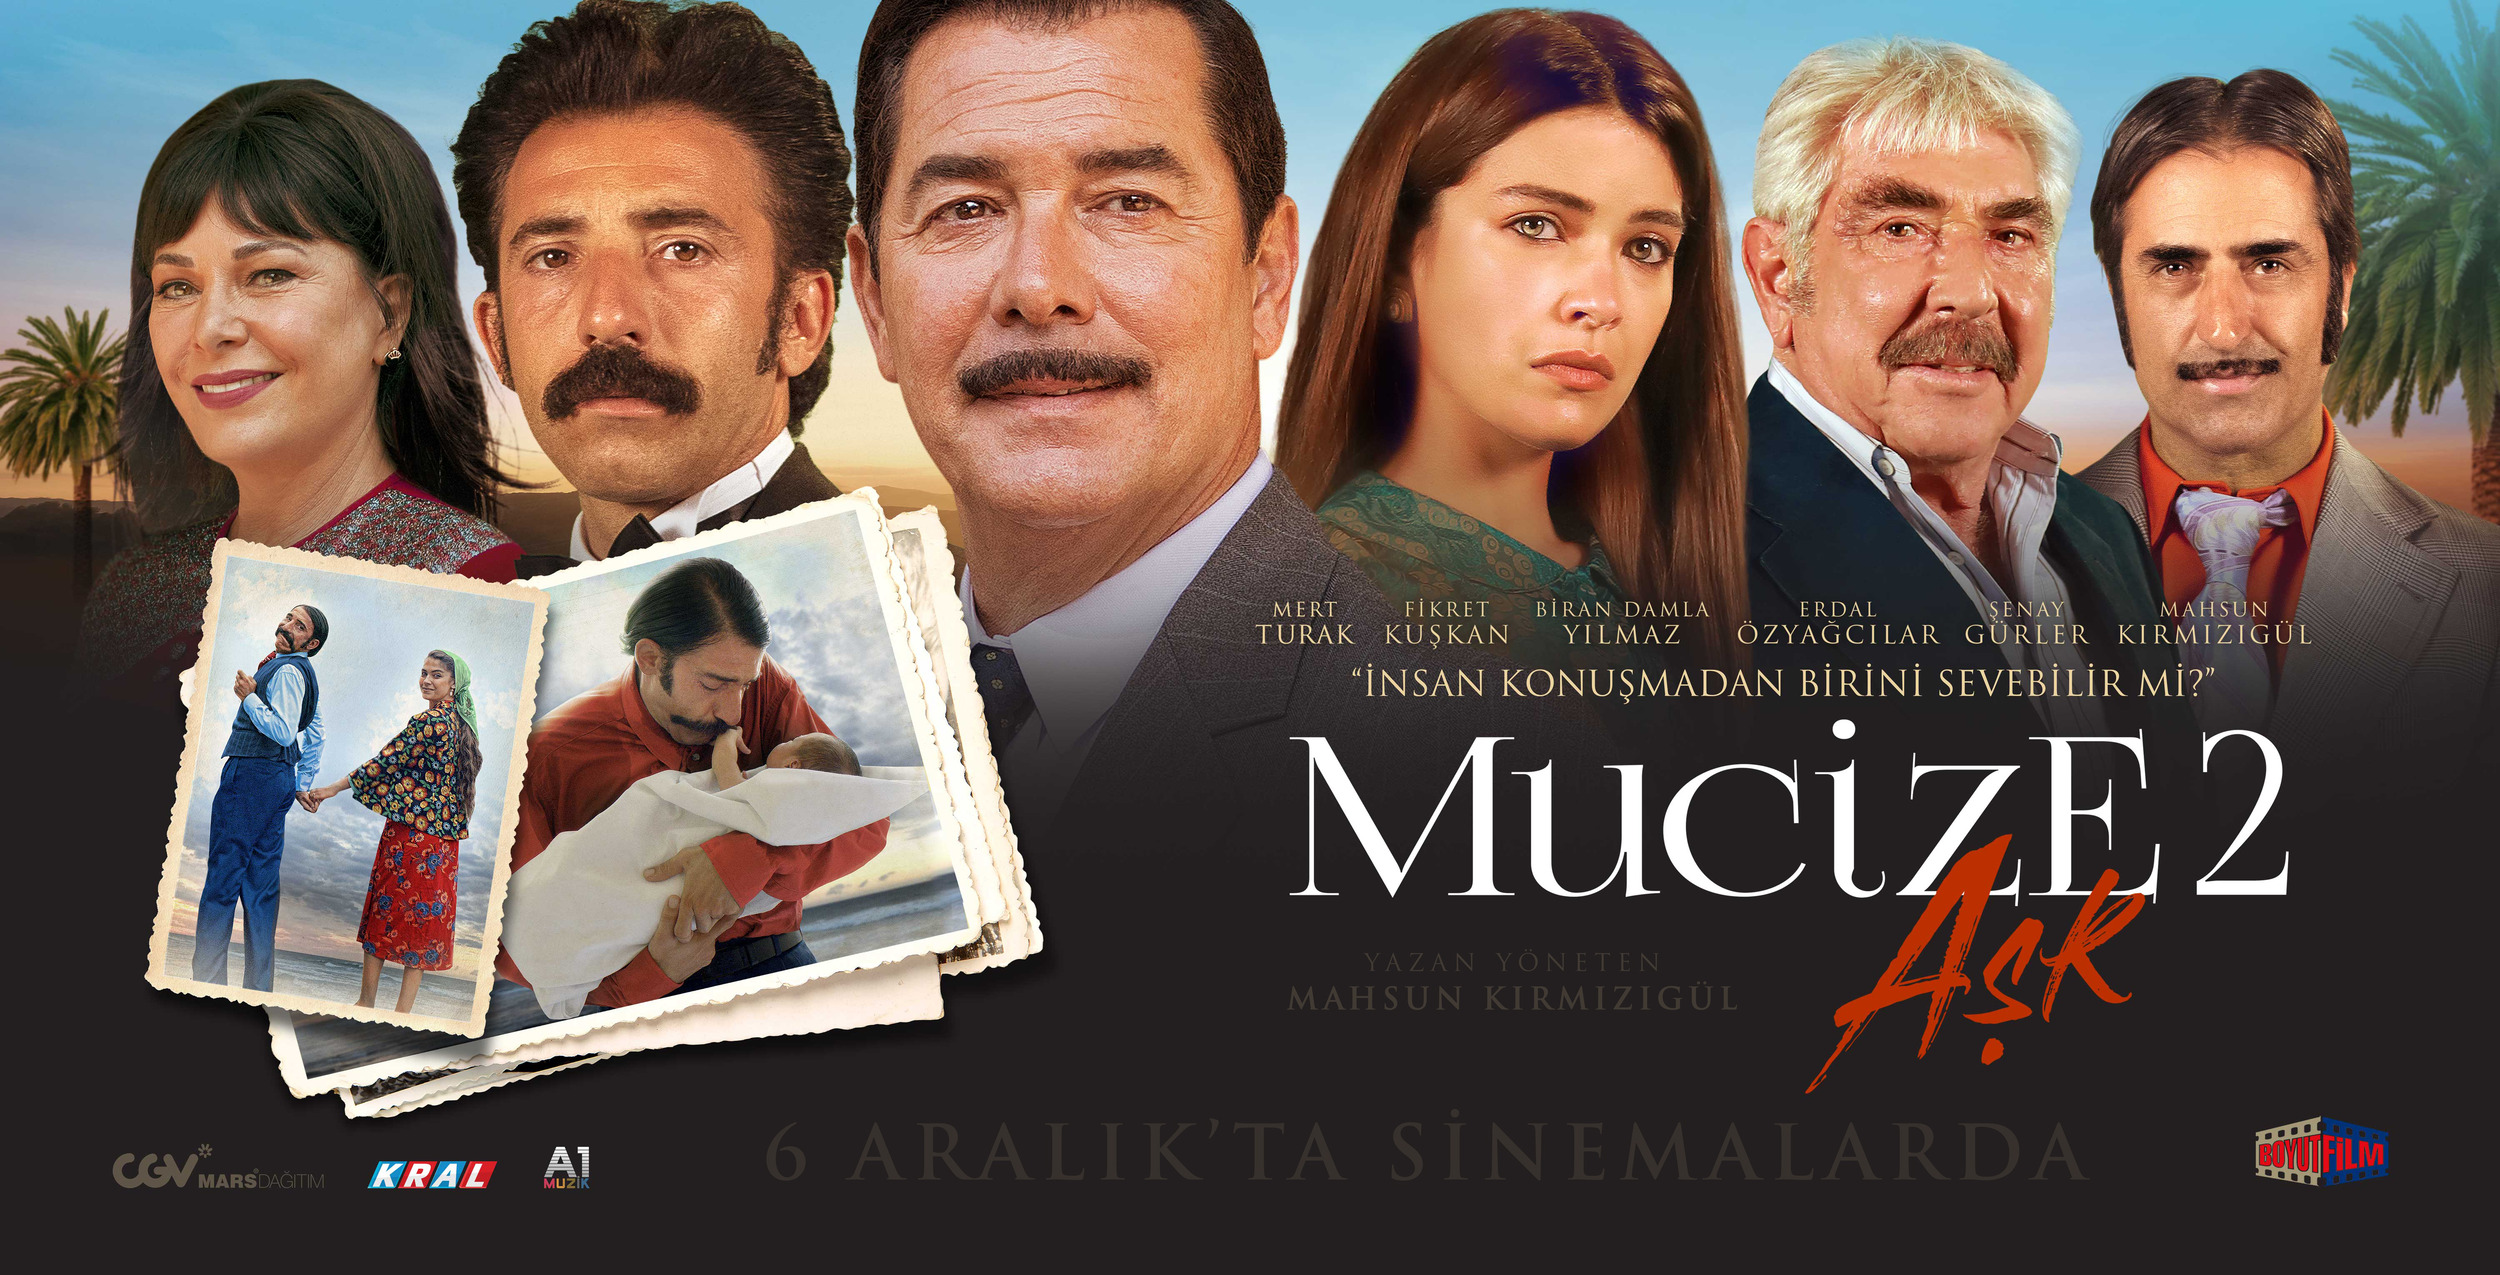 Mega Sized Movie Poster Image for Mucize 2: Ask (#4 of 4)